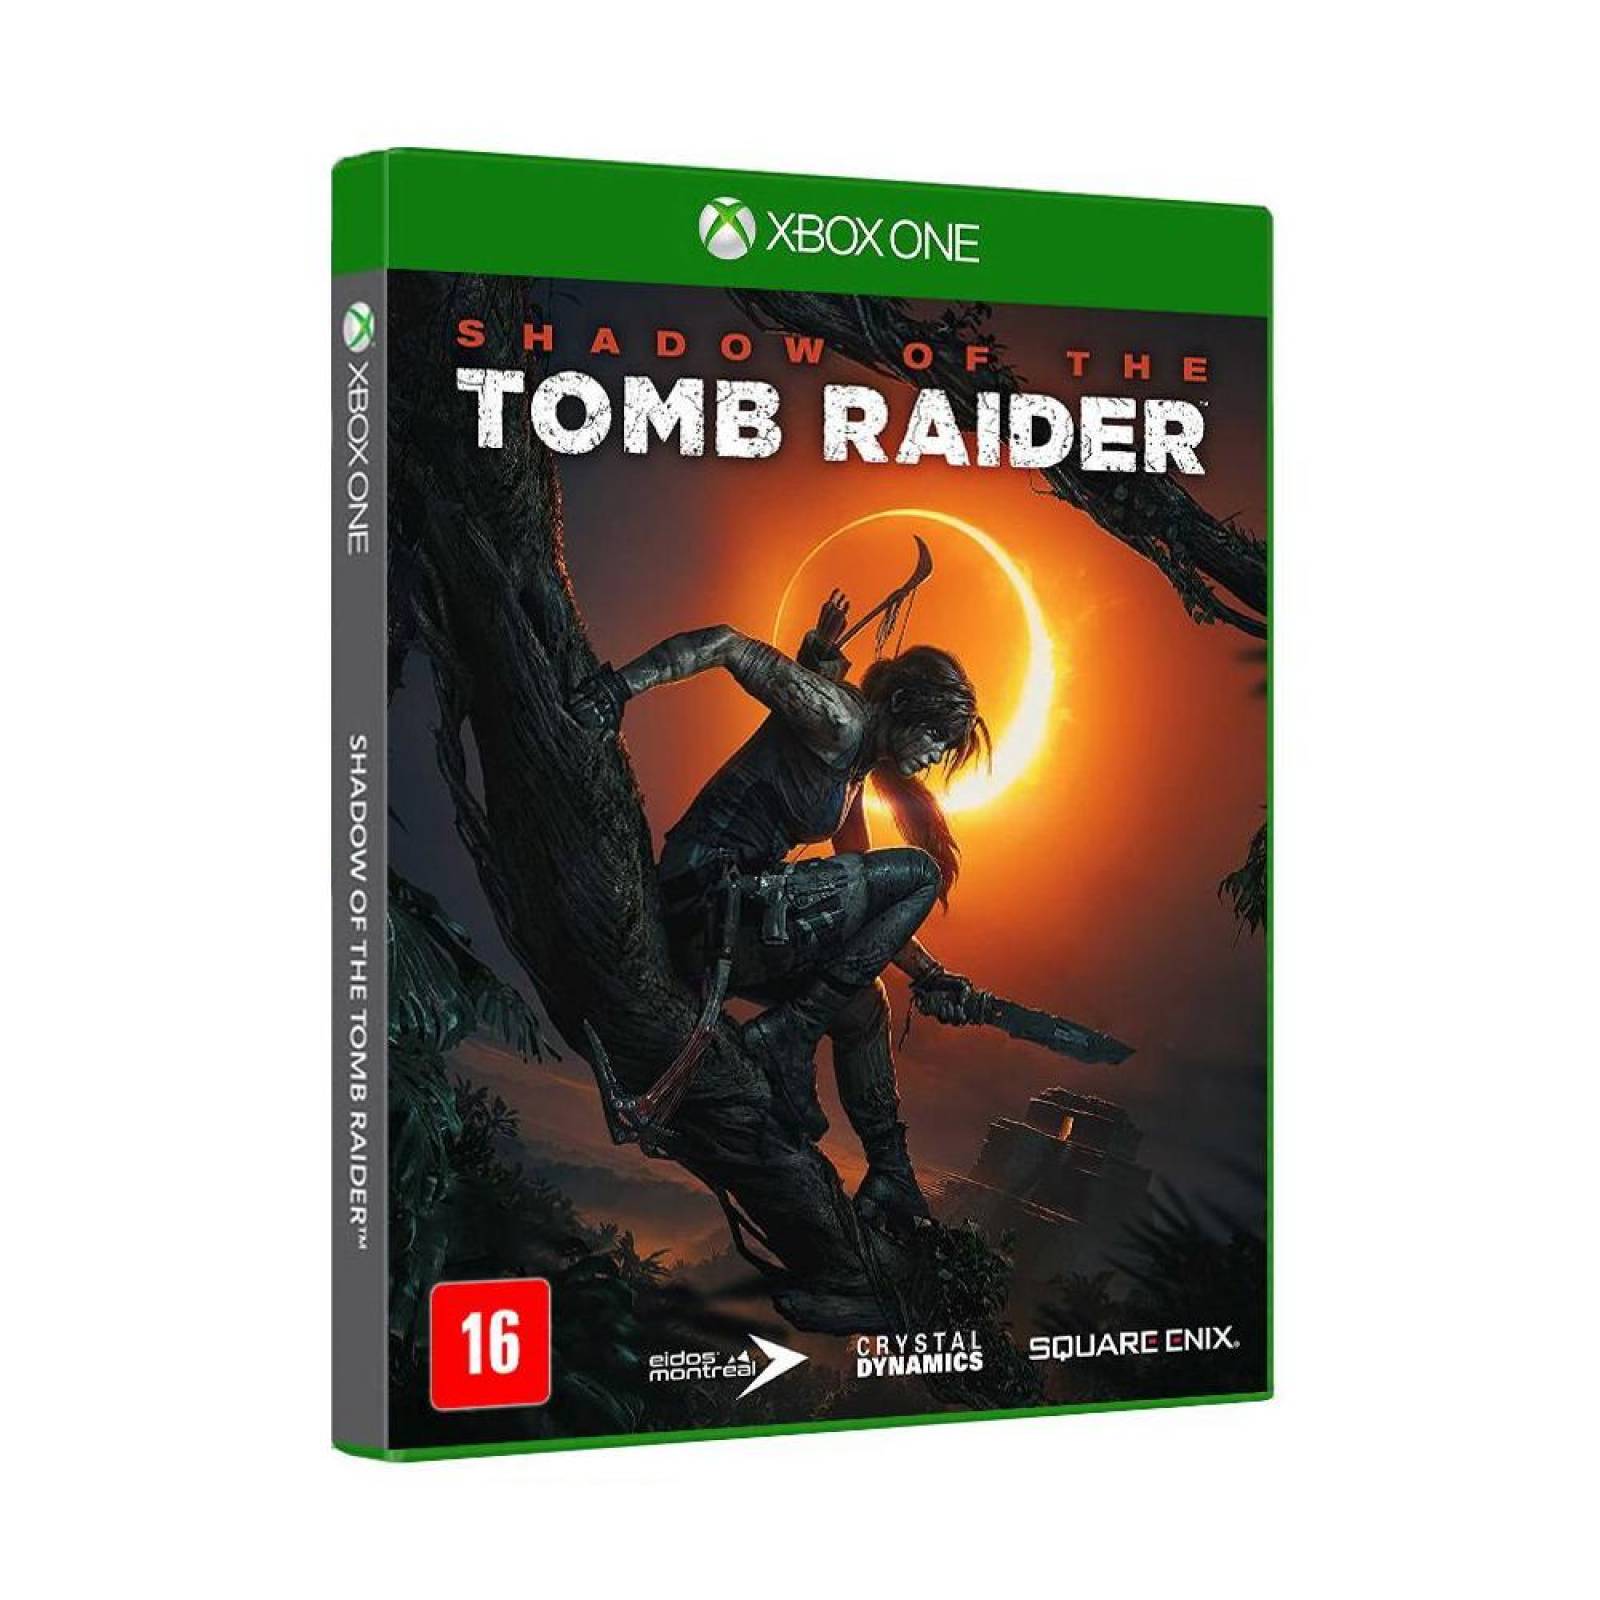 Shadow Of The Tomb Raider Limited Steelbook Xbox One - S001 